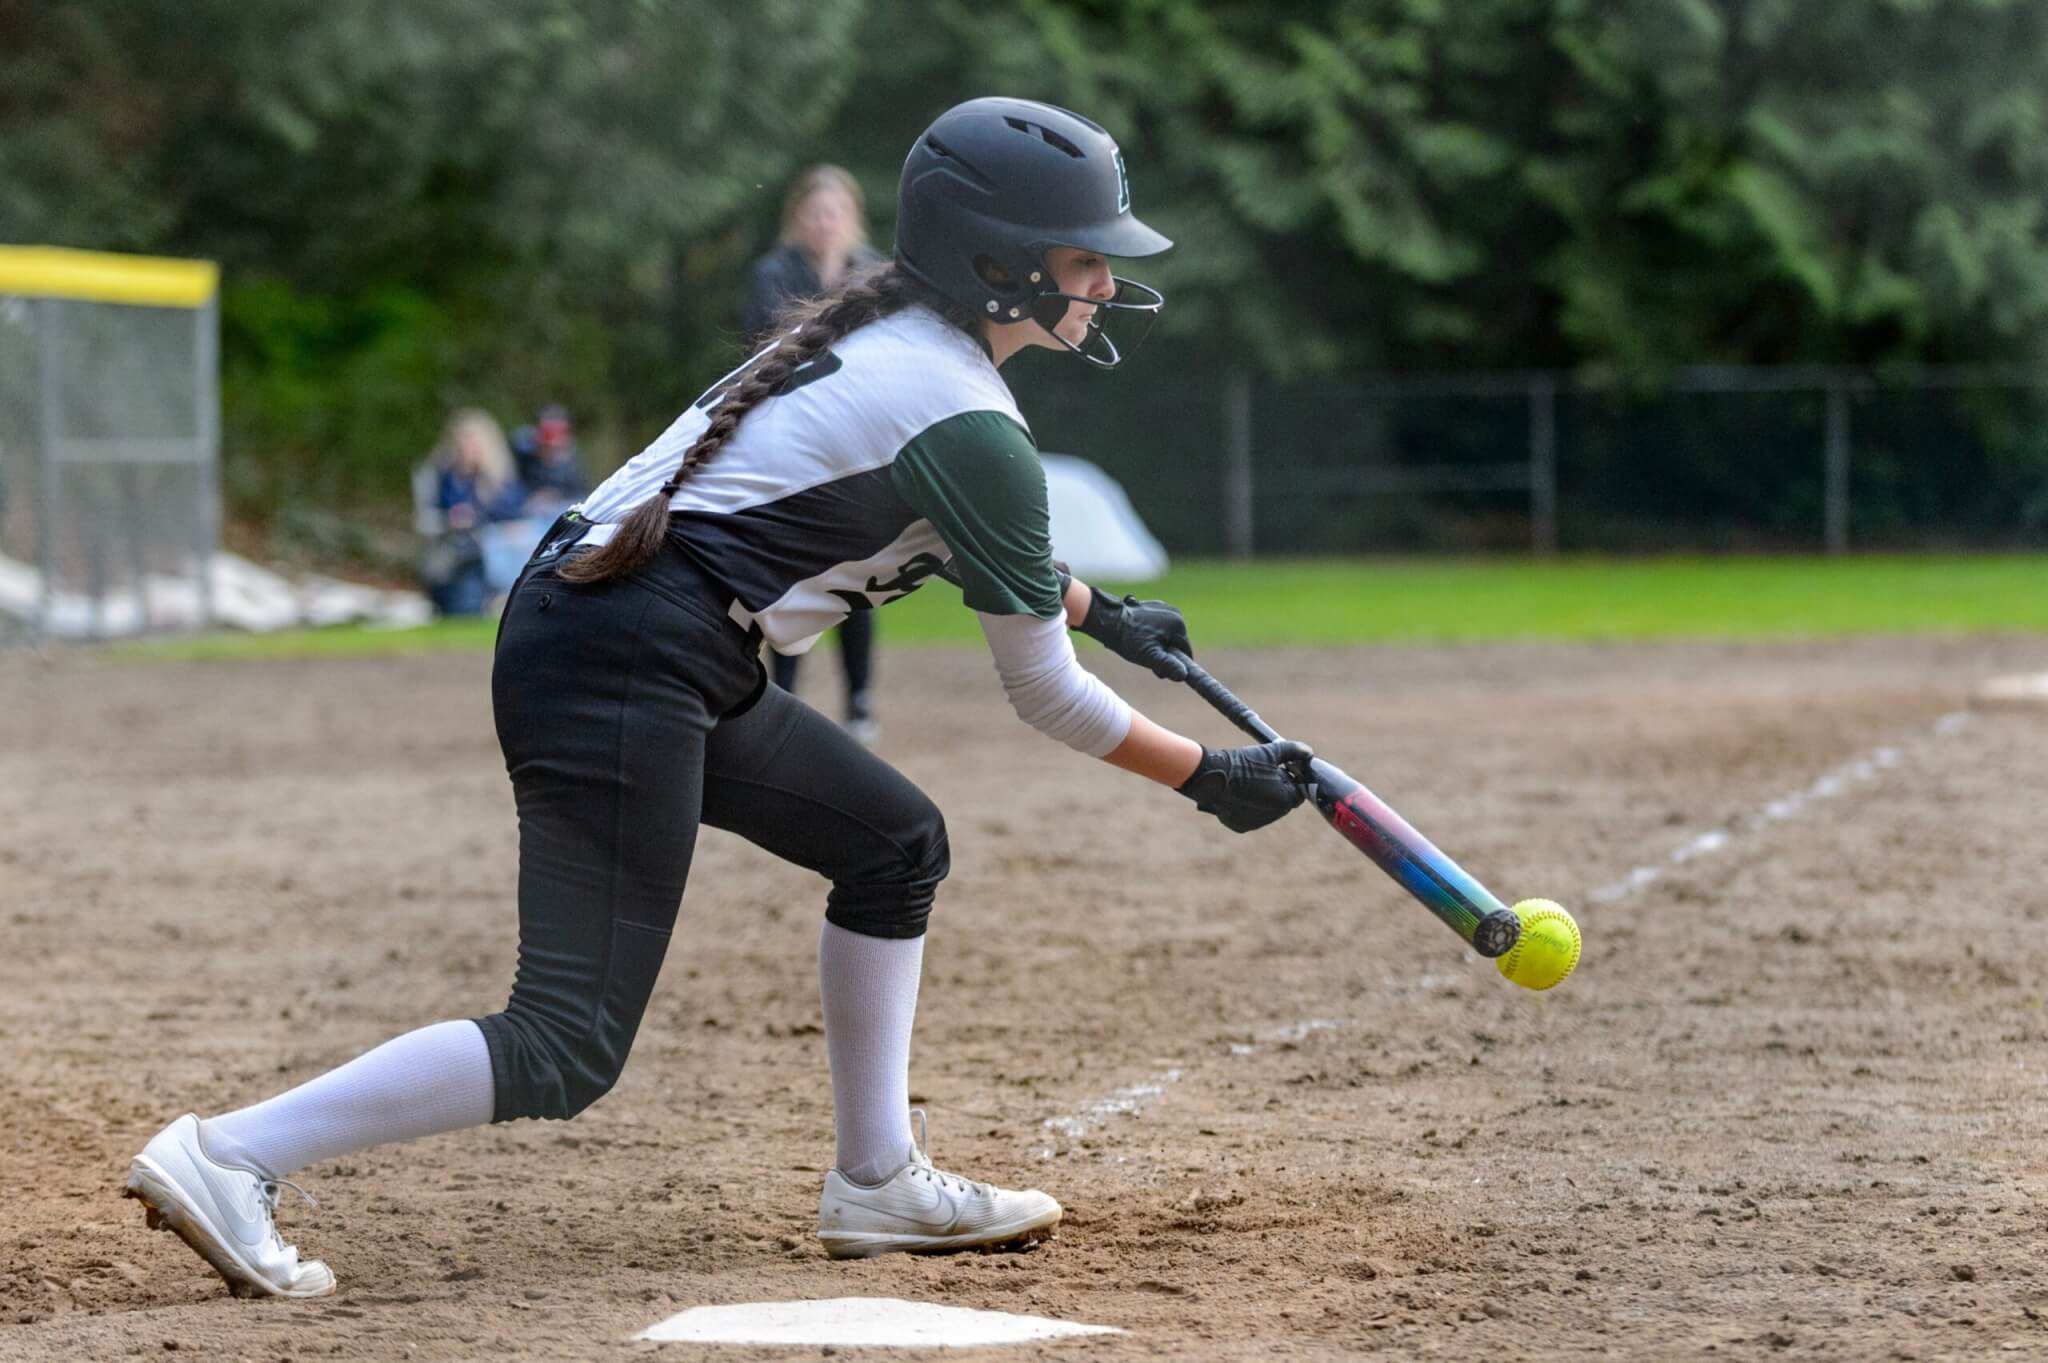 Best Softball Bats Top 5 Designs Most Recommended By Experts